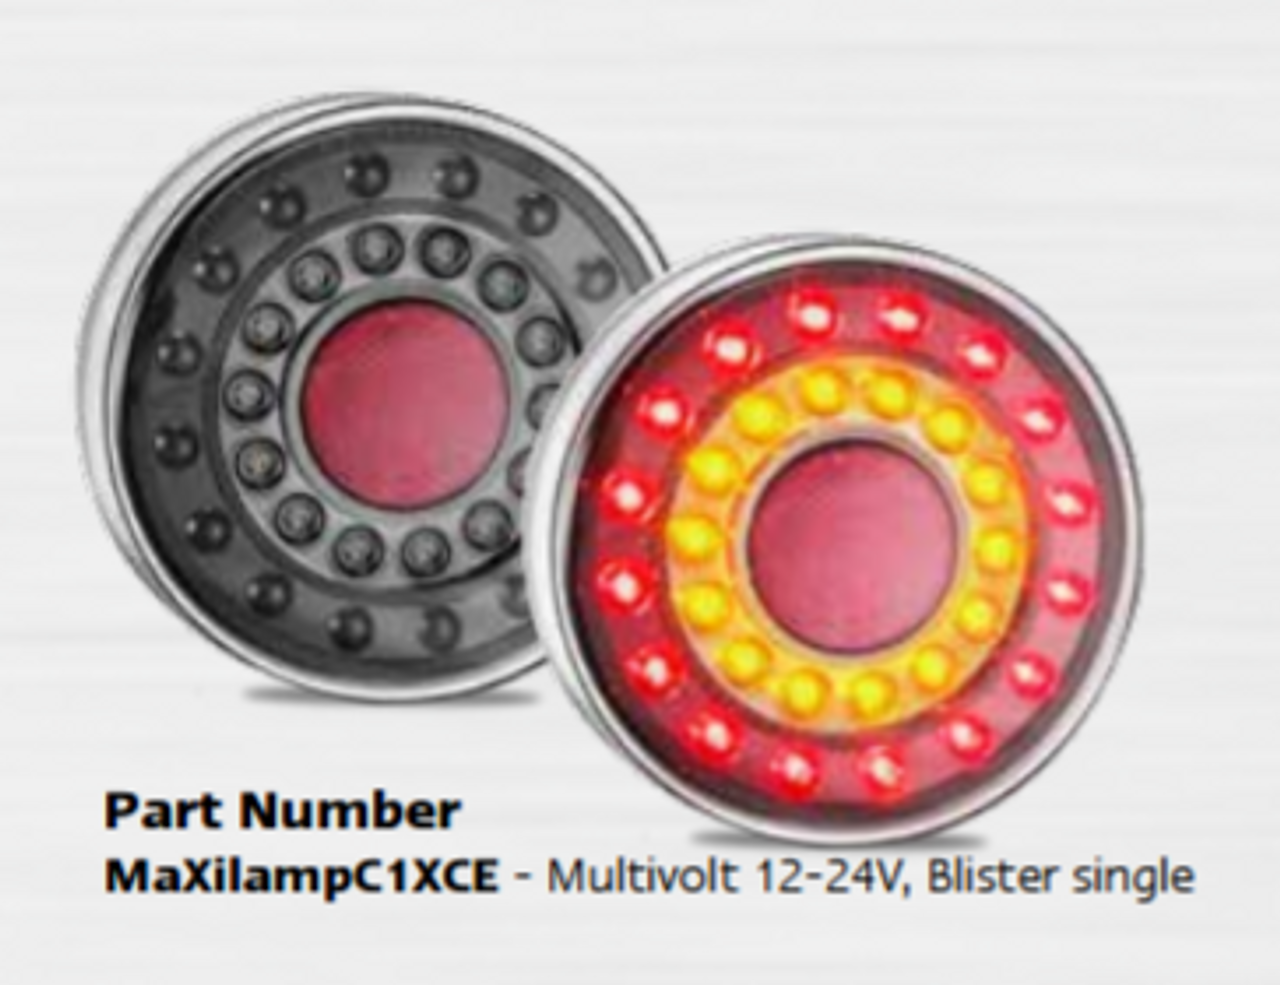 MAXILAMPC1XCE - Modern, Stylish LED Tail Light. Stop, Tail & Indicator with Reflector Light Multi-Volt 12 & 24 Volt Clear Lens Round Reflector. Single Pack. LED Auto Lamps. Ultimate LED.